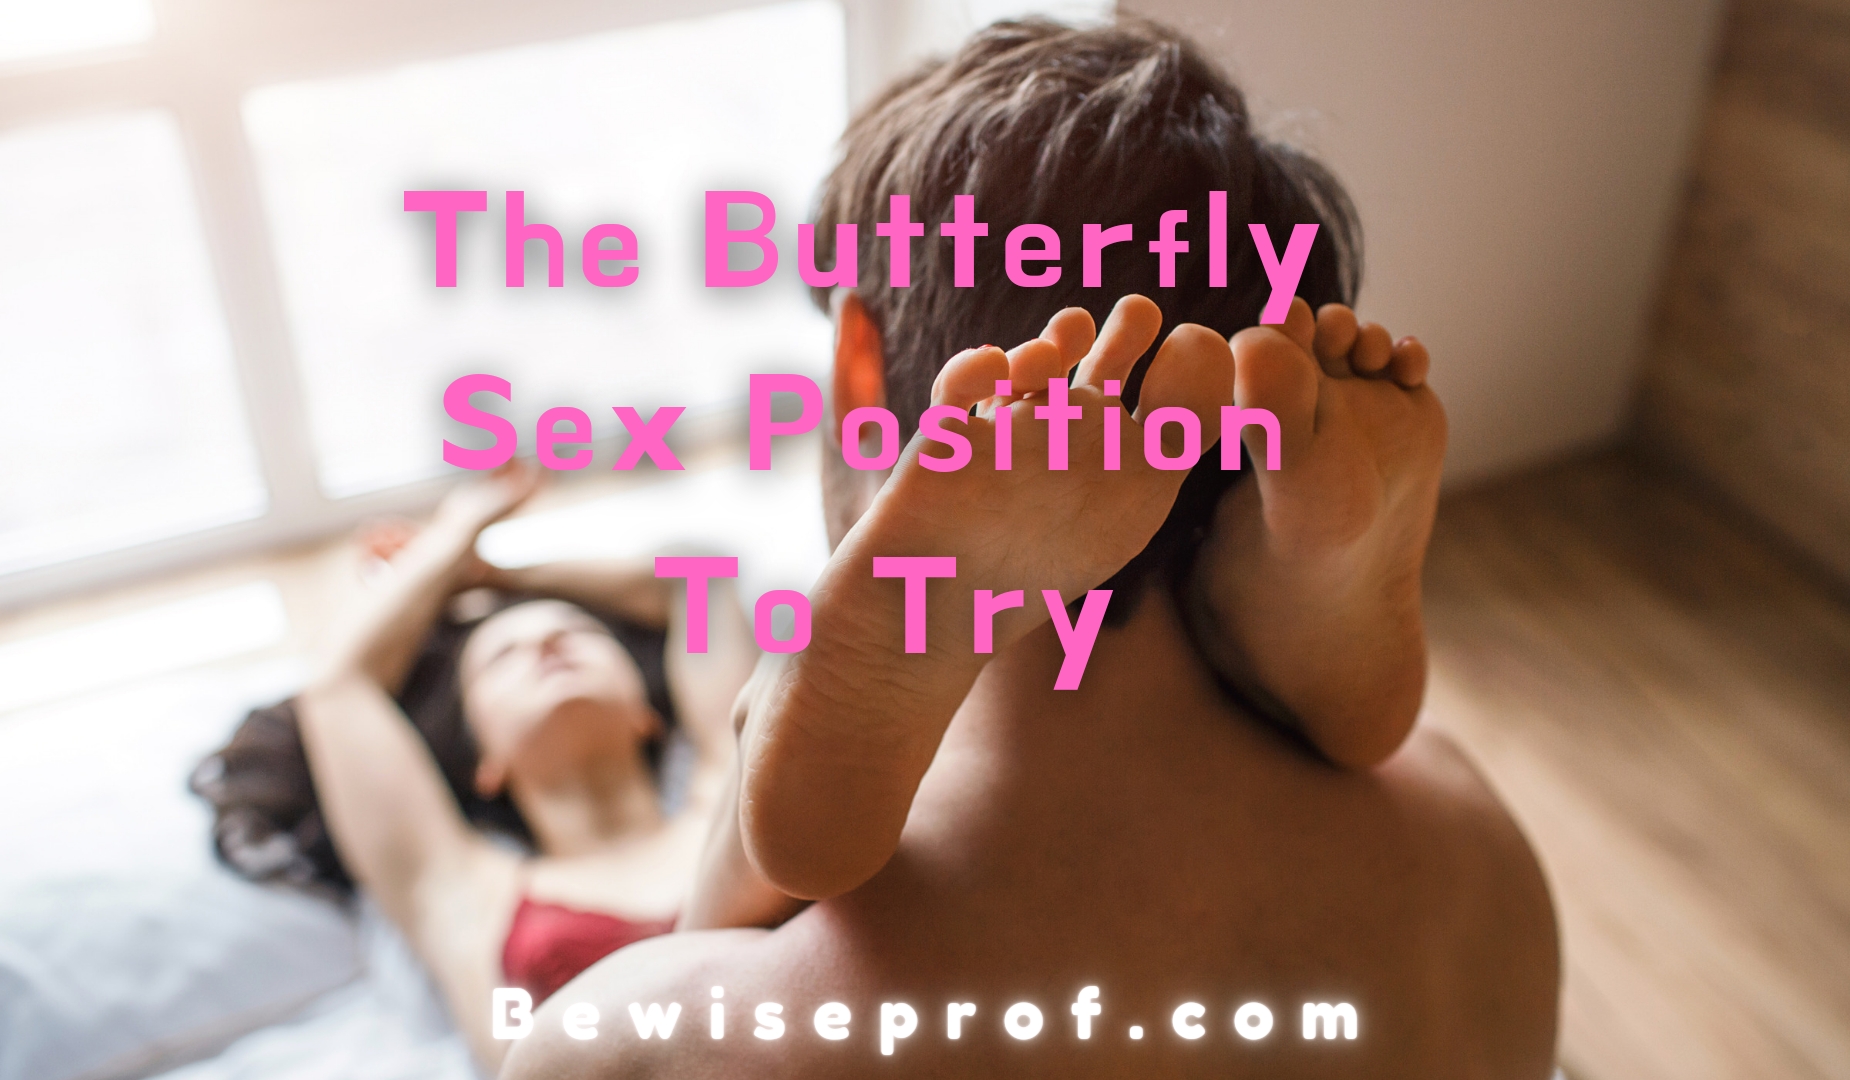 The Butterfly Sex Position To Try